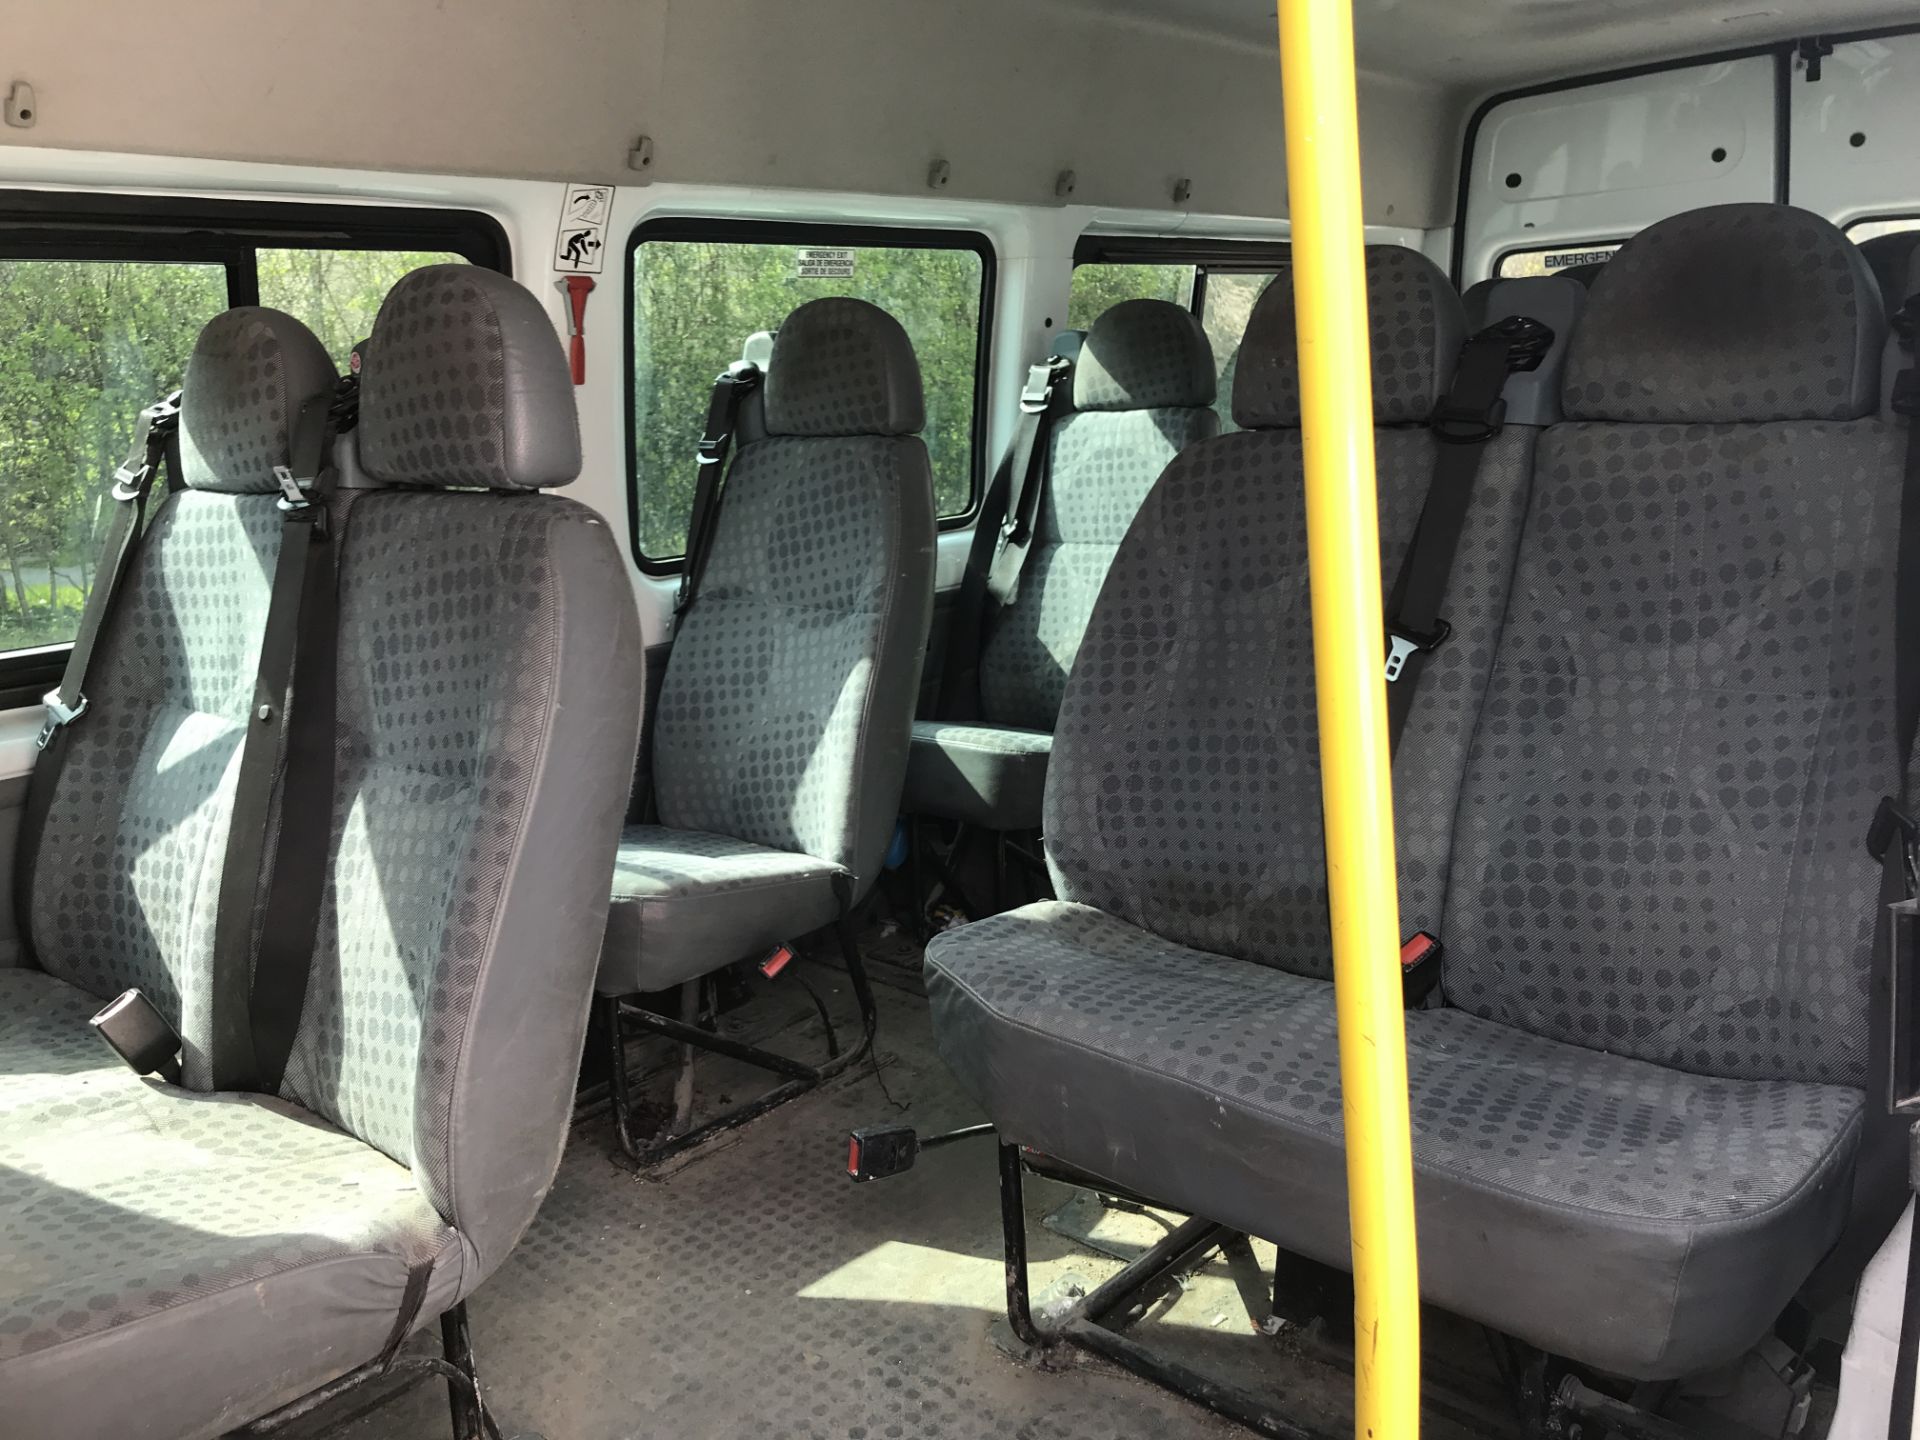 Ford Transit 135 T430 RWD Diesel 17-Seater Minibus, registration no. GY61 VKH, date first registered - Image 6 of 6